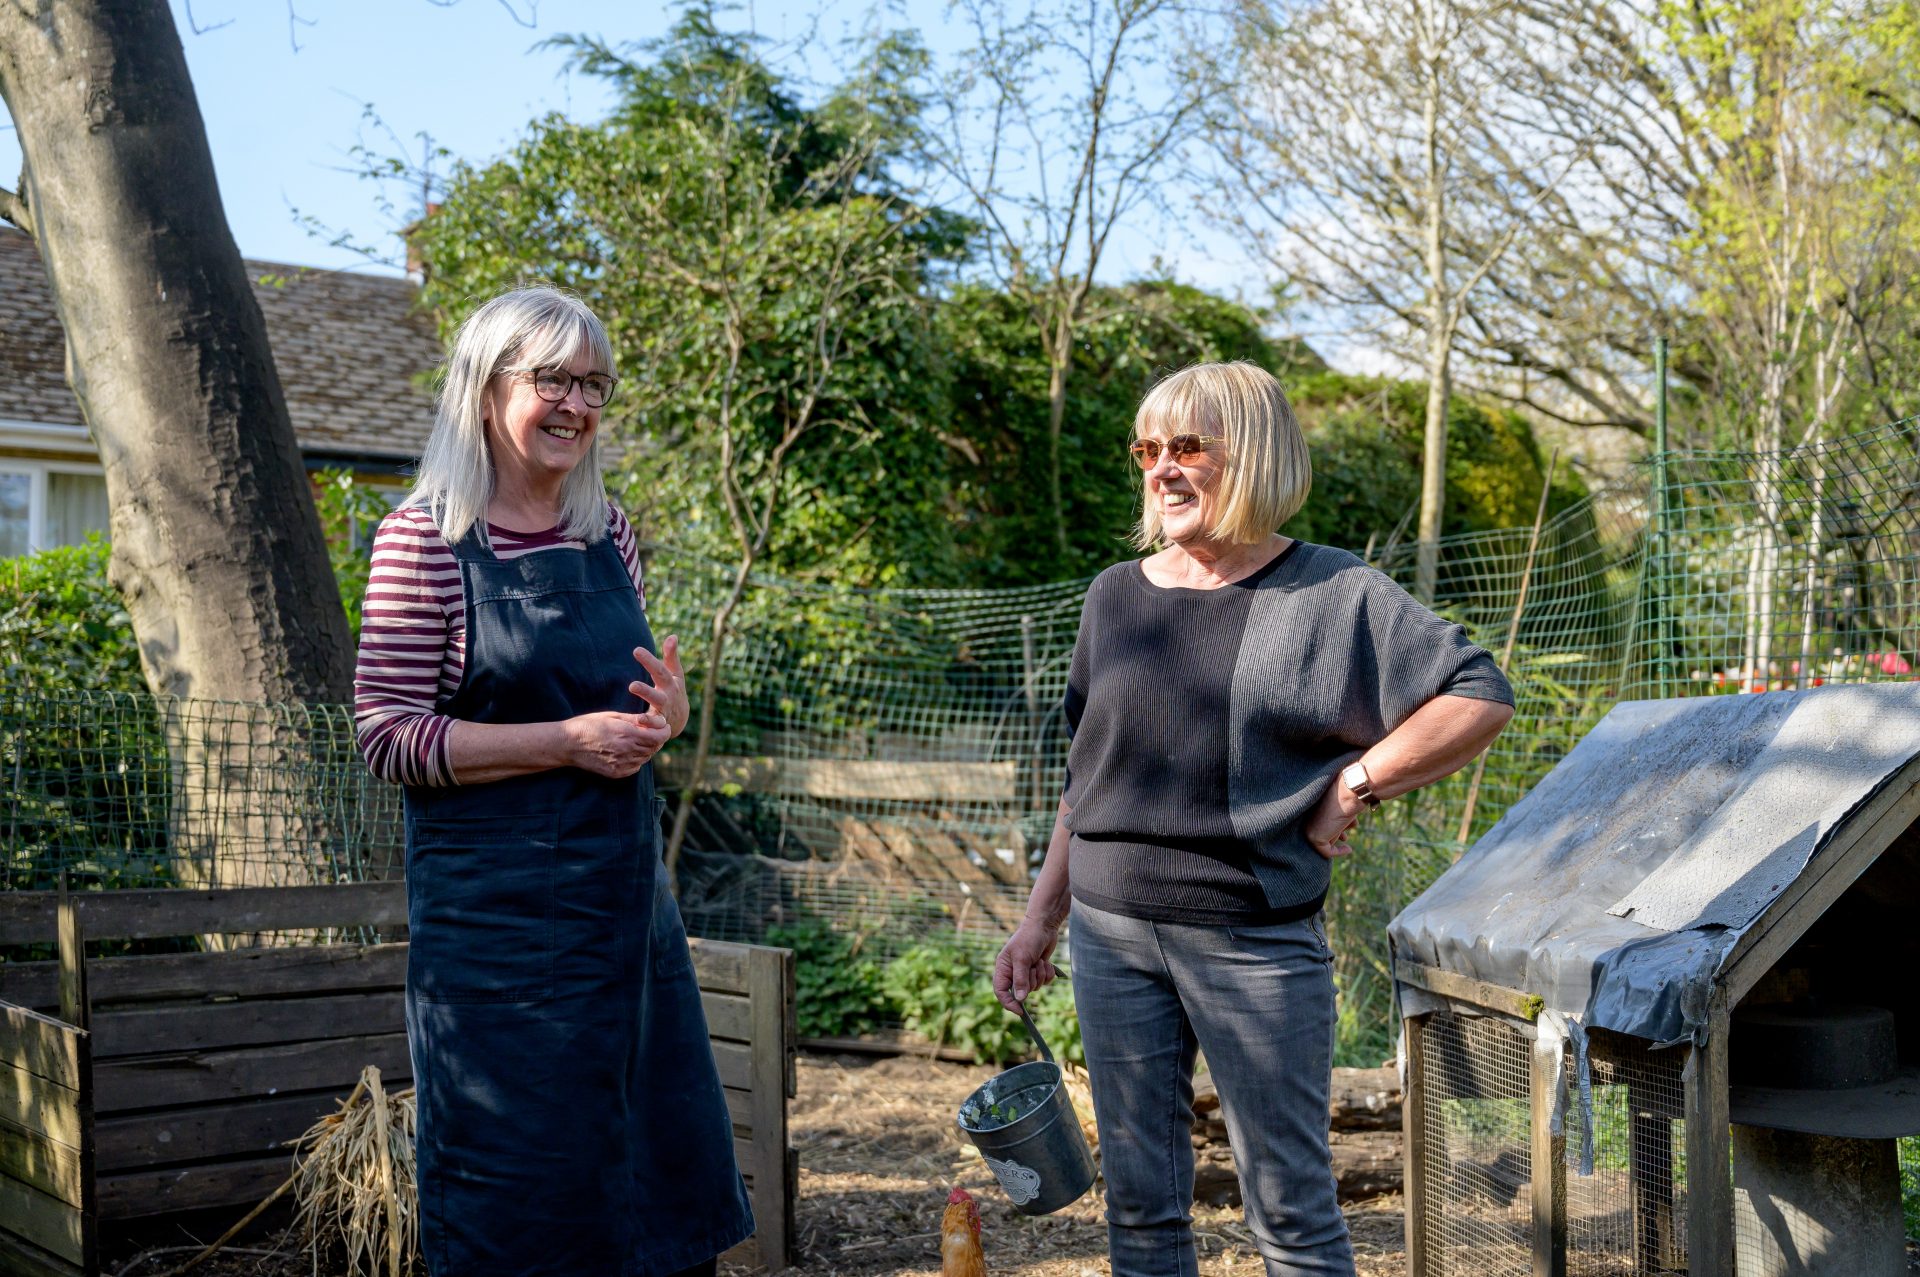 Two elderly women are standing in a garden in the sun, laughing and chatting.